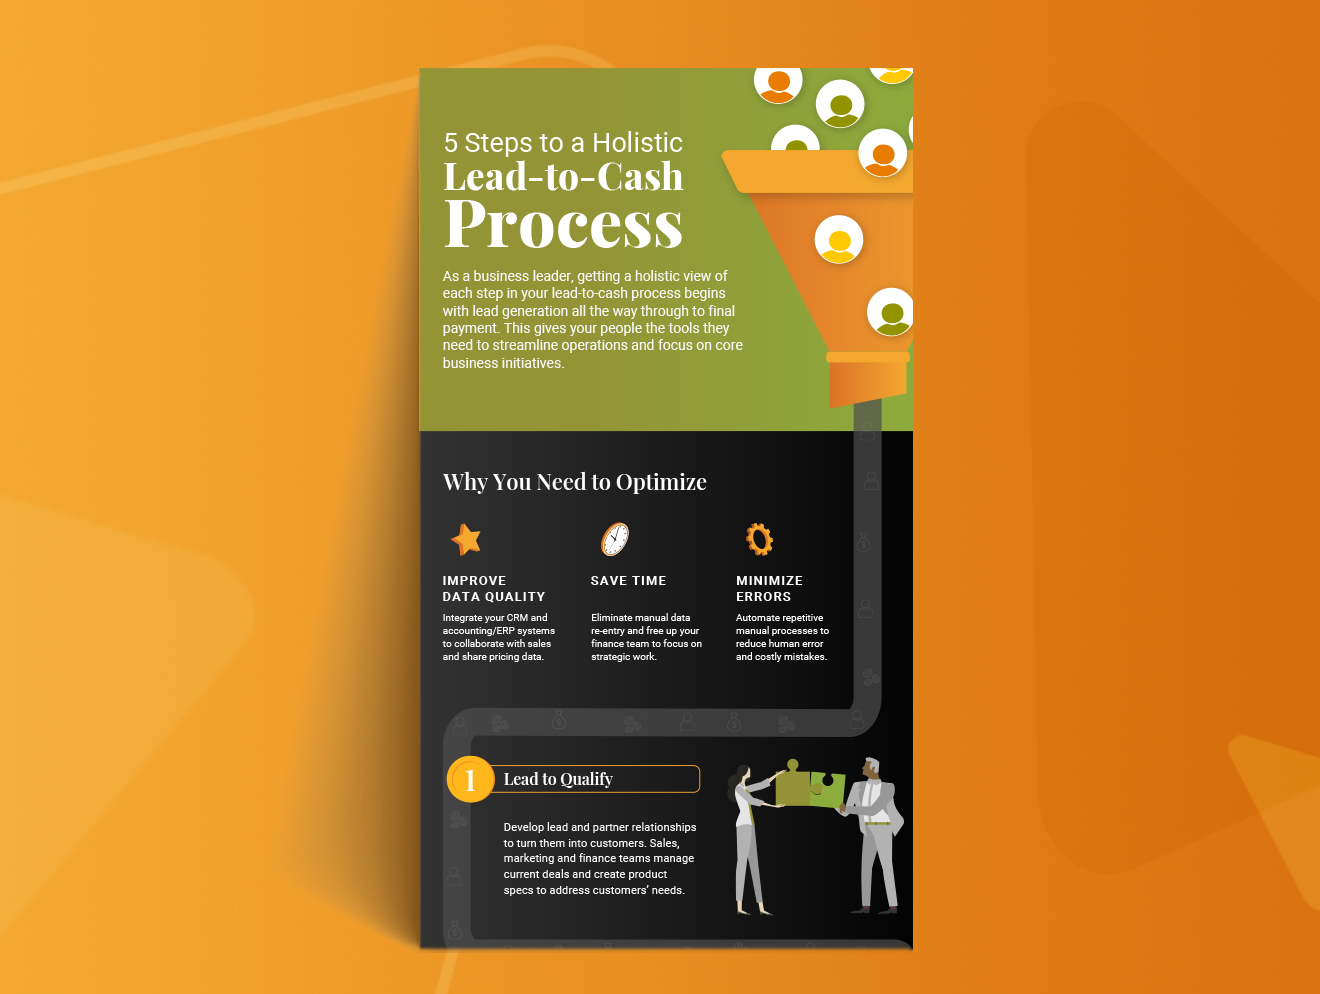 5 Steps to a Holistic Lead-to-Cash Process Infographic